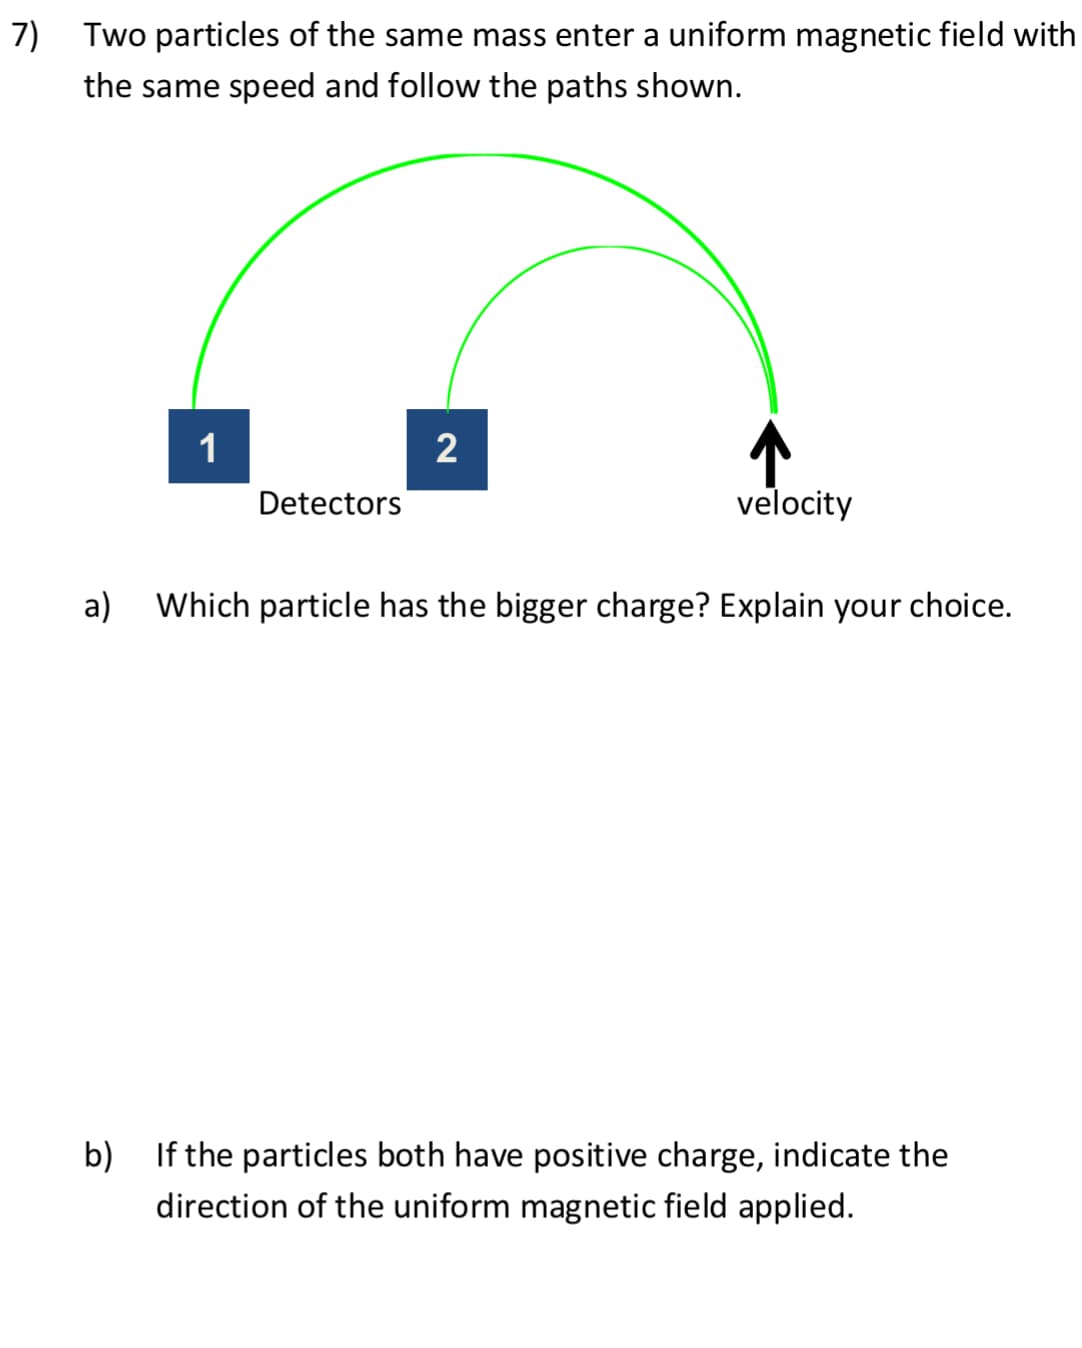 7)
Two particles of the same mass enter a uniform magnetic field with
the same speed and follow the paths shown.
a)
1
Detectors
2
↑
velocity
Which particle has the bigger charge? Explain your choice.
b) If the particles both have positive charge, indicate the
direction of the uniform magnetic field applied.